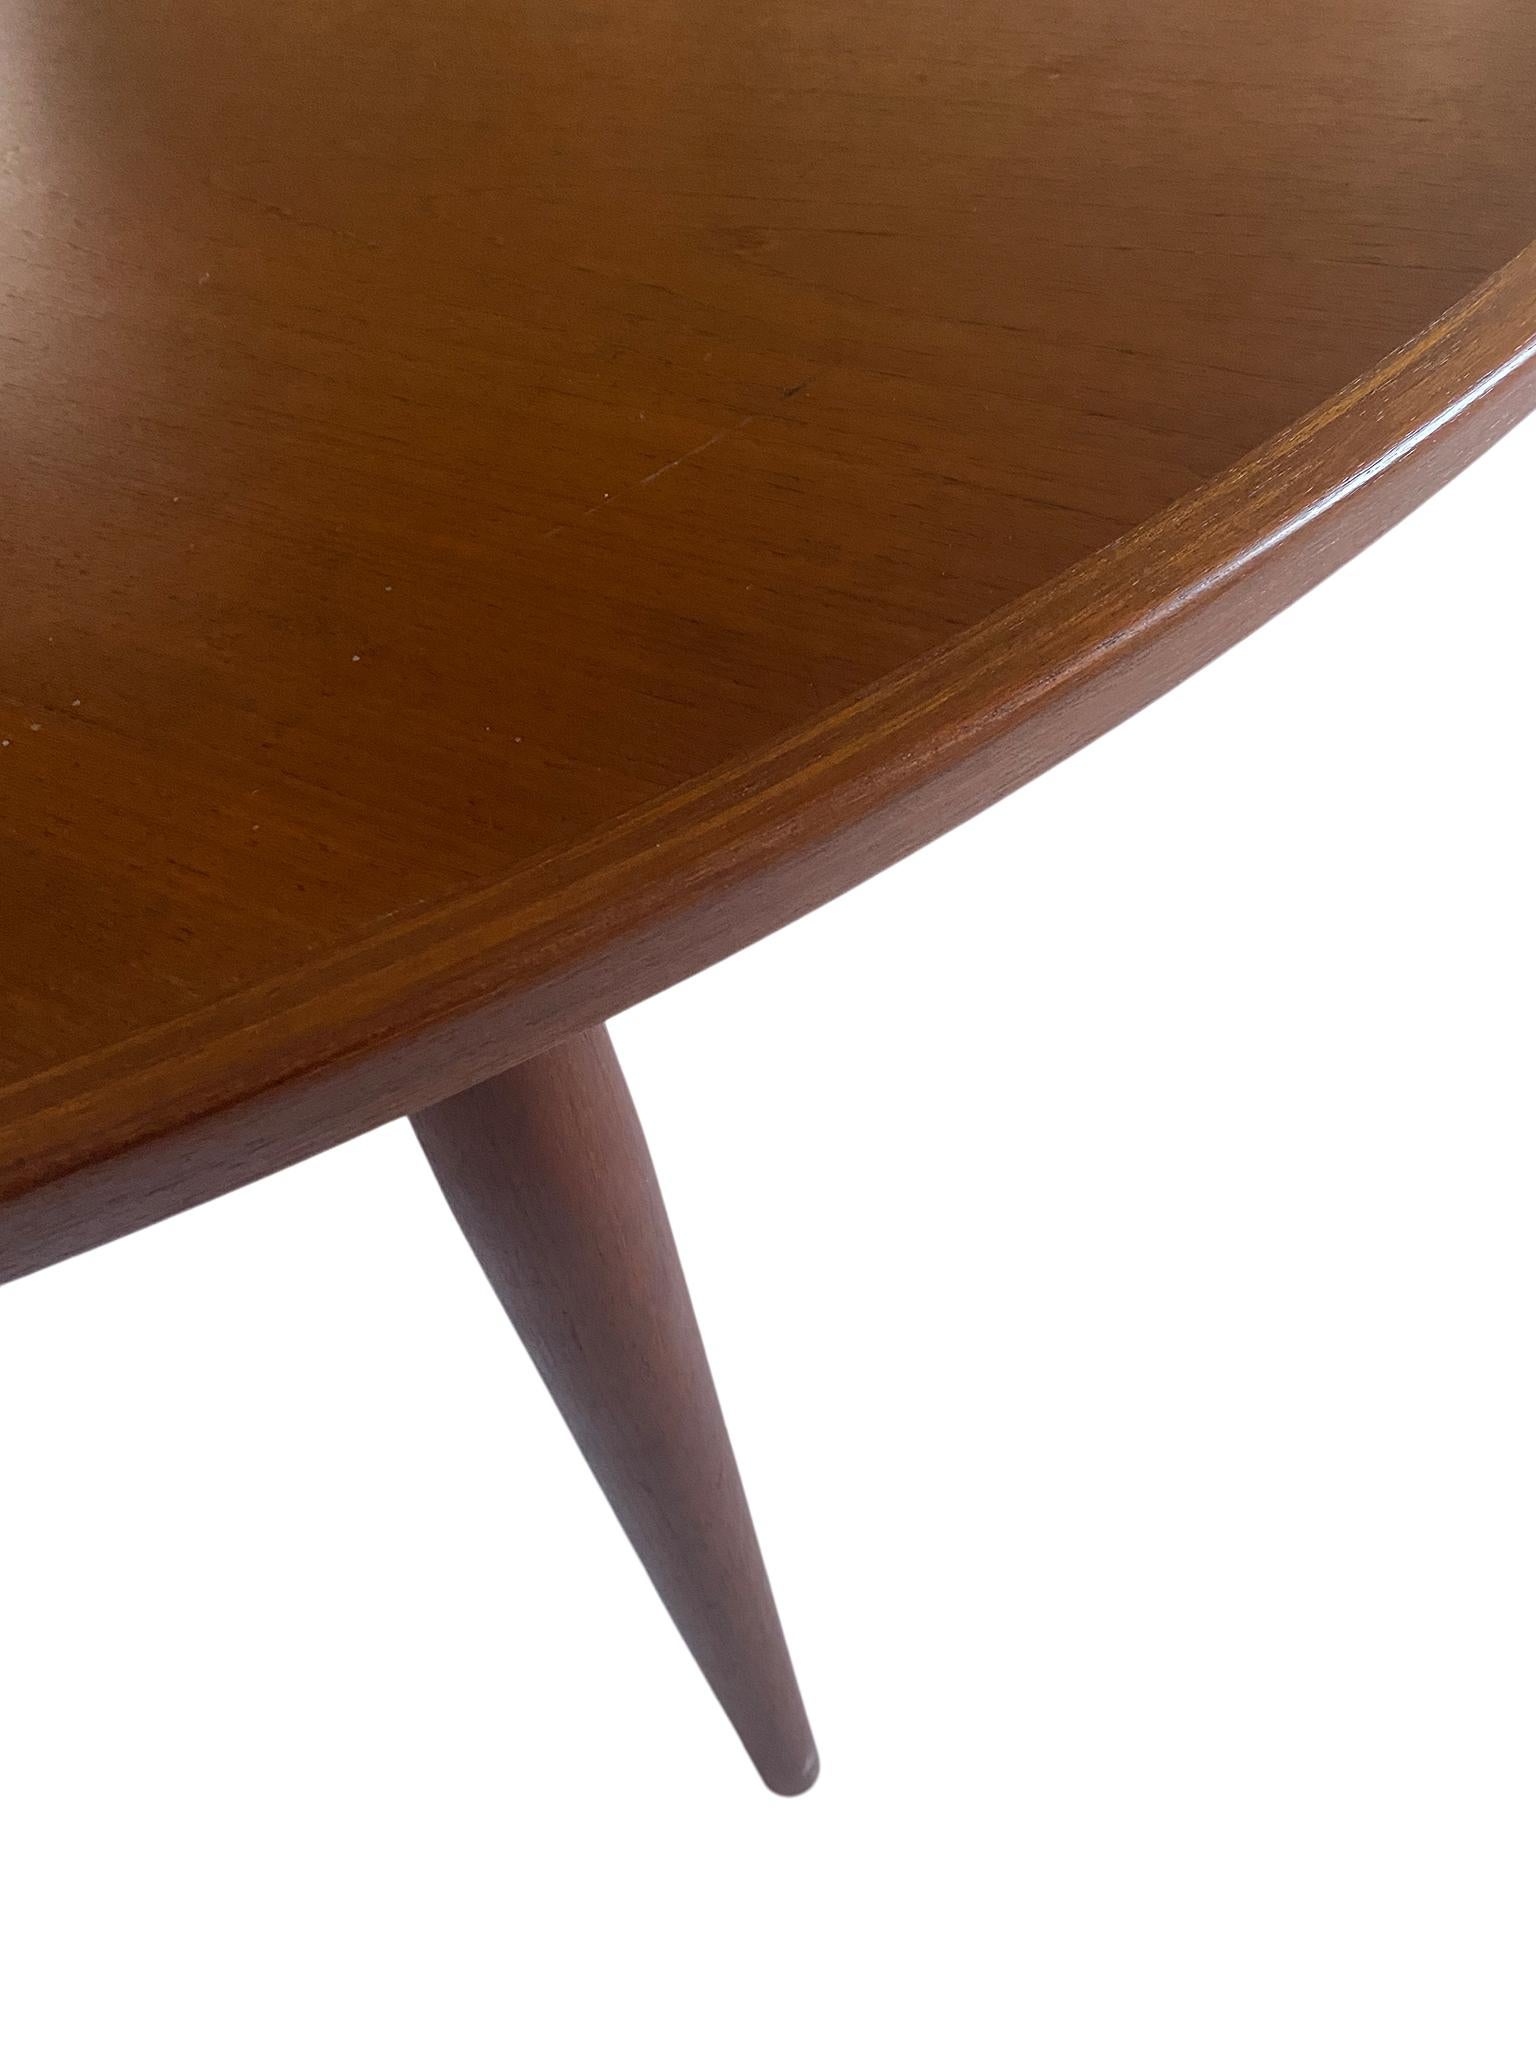 Mid-20th Century Midcentury Elliptical Danish Teak Expandable Dining Table by Arne Vodder No. 212